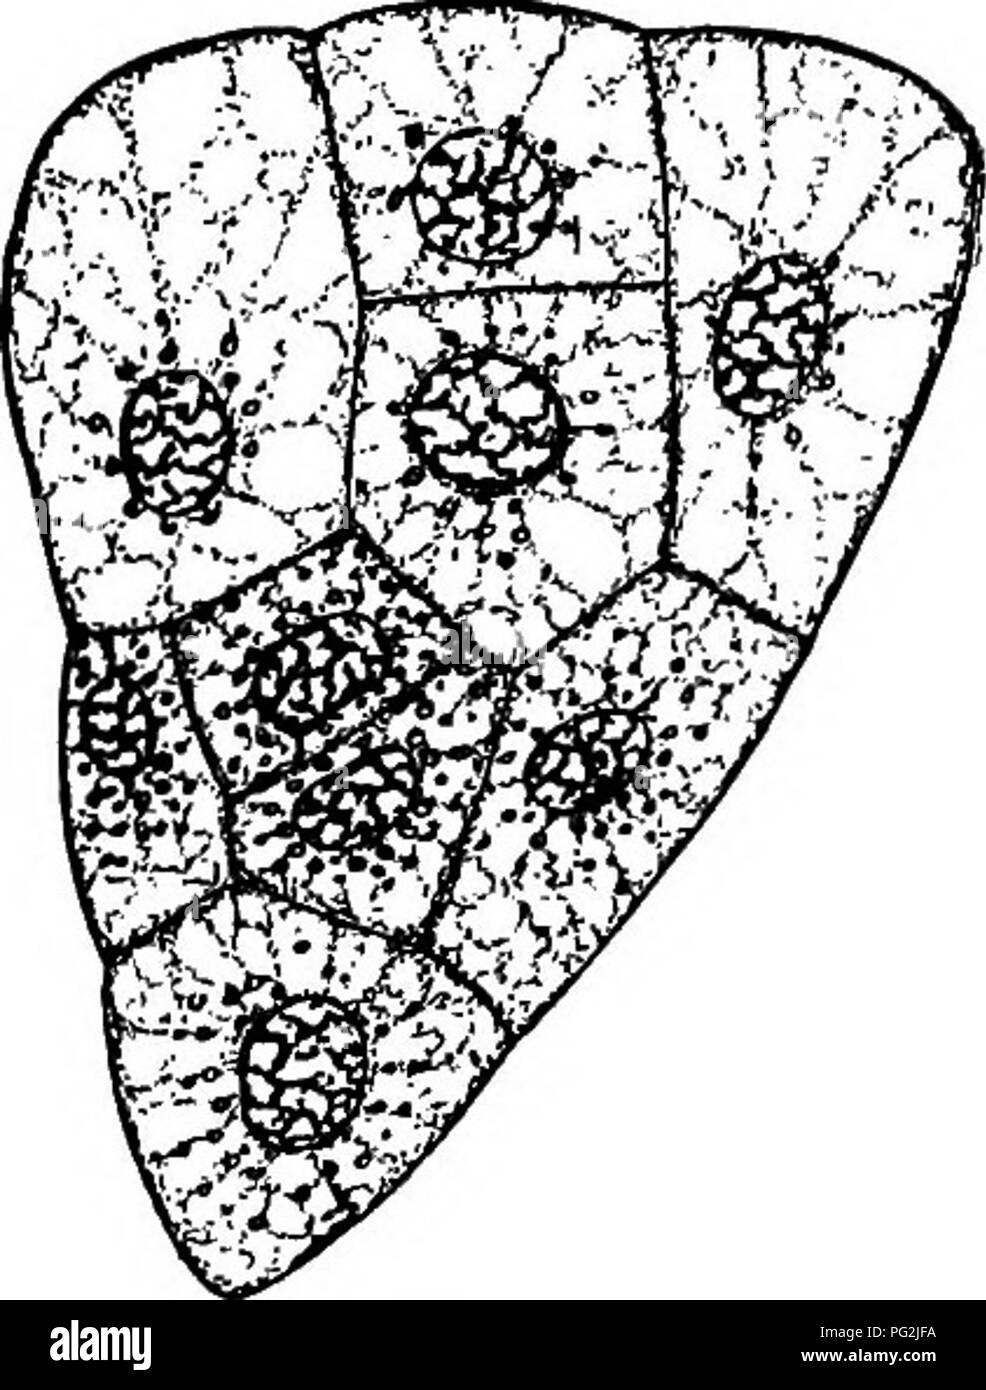 . Morphology of gymnosperms. Gymnosperms; Plant morphology. Figs. 401, 402.—Torreya taxifolia: fig. 401, four-nucleate stage of proembryo; August 12, 1904; X460; fig. 402, proembryo showing the three tiers of cells; the entire egg is segmented; the proembryo passes the winter in this stage; August 27, 1904; X460.—After Coulter and Land (ioi). Among the podocarps Podocarpus (69) and Phyllocladus (144) have been investigated. In the former genus the fusion nucleus assumes the basal position, and sixteen free nuclei appear before wall-formation. The three tiers of the completed proembryo are made Stock Photo